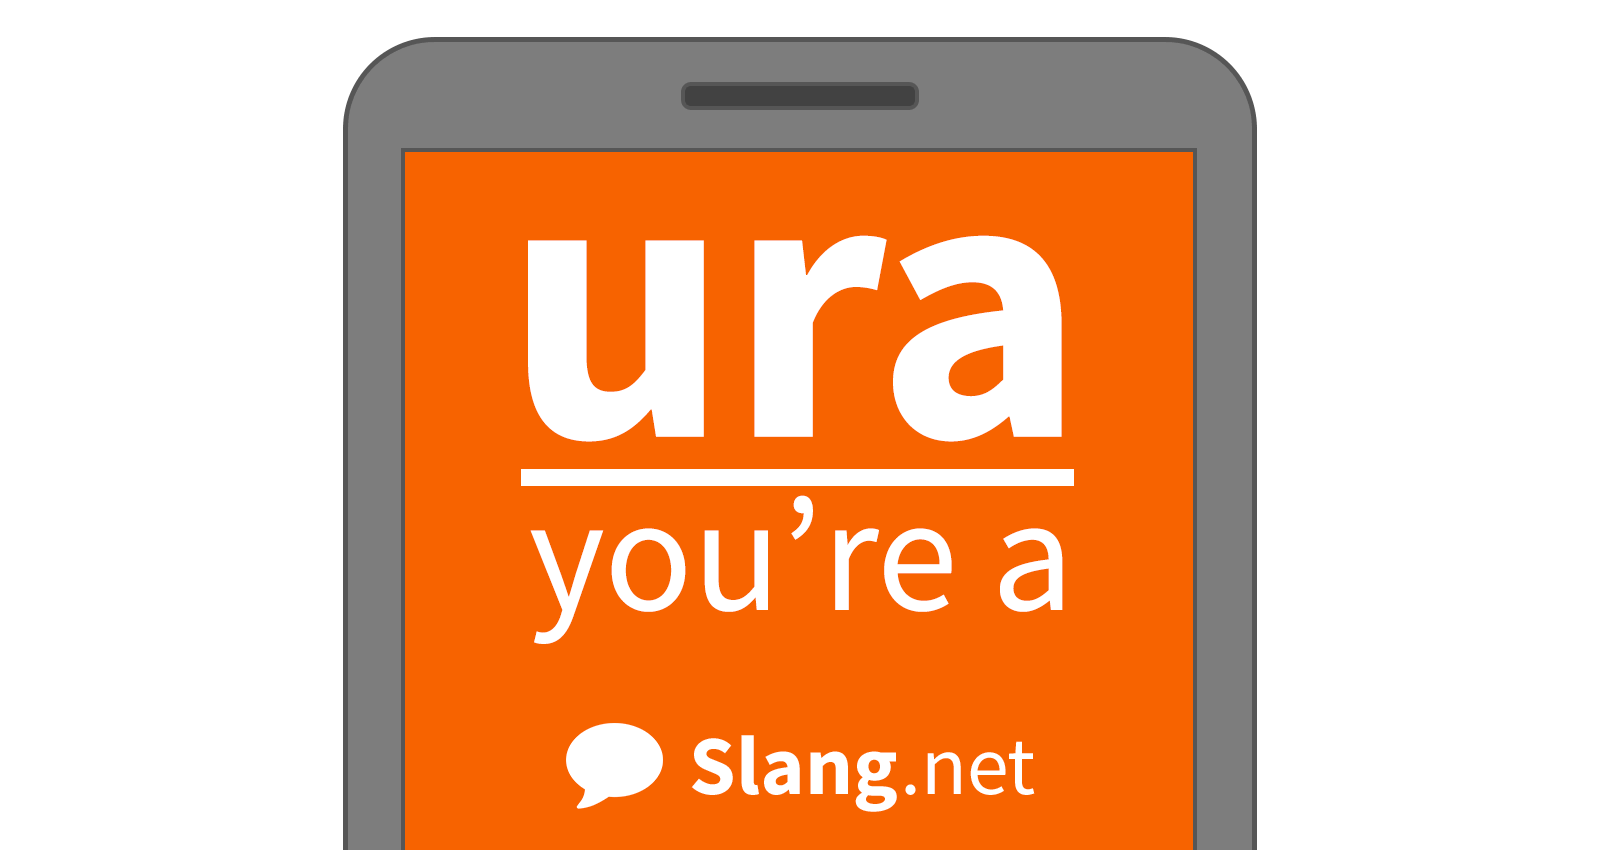 You will likely see ura in messages online and in texts